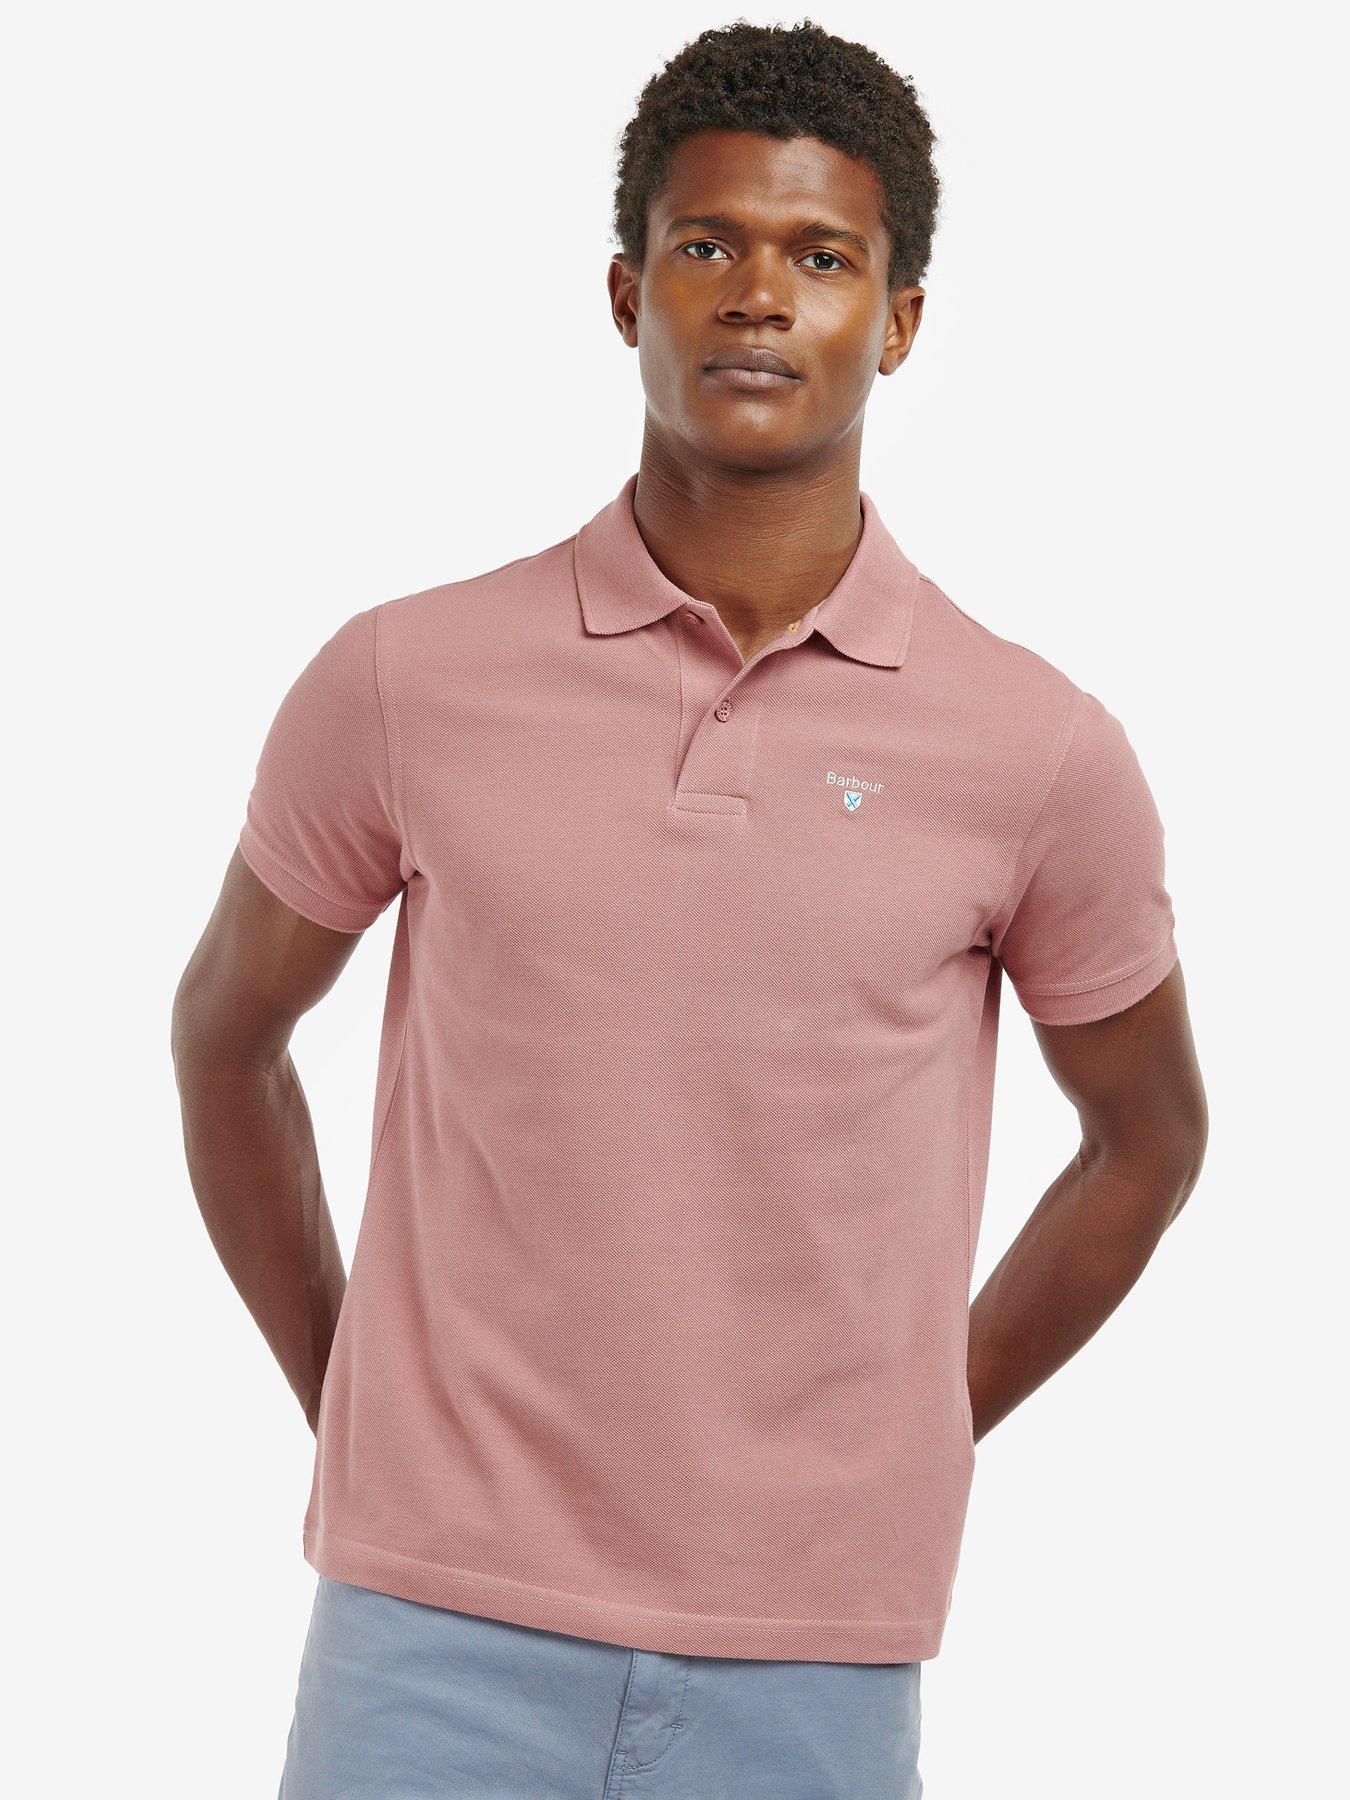 Sports Shirt - Pink Polo Barbour